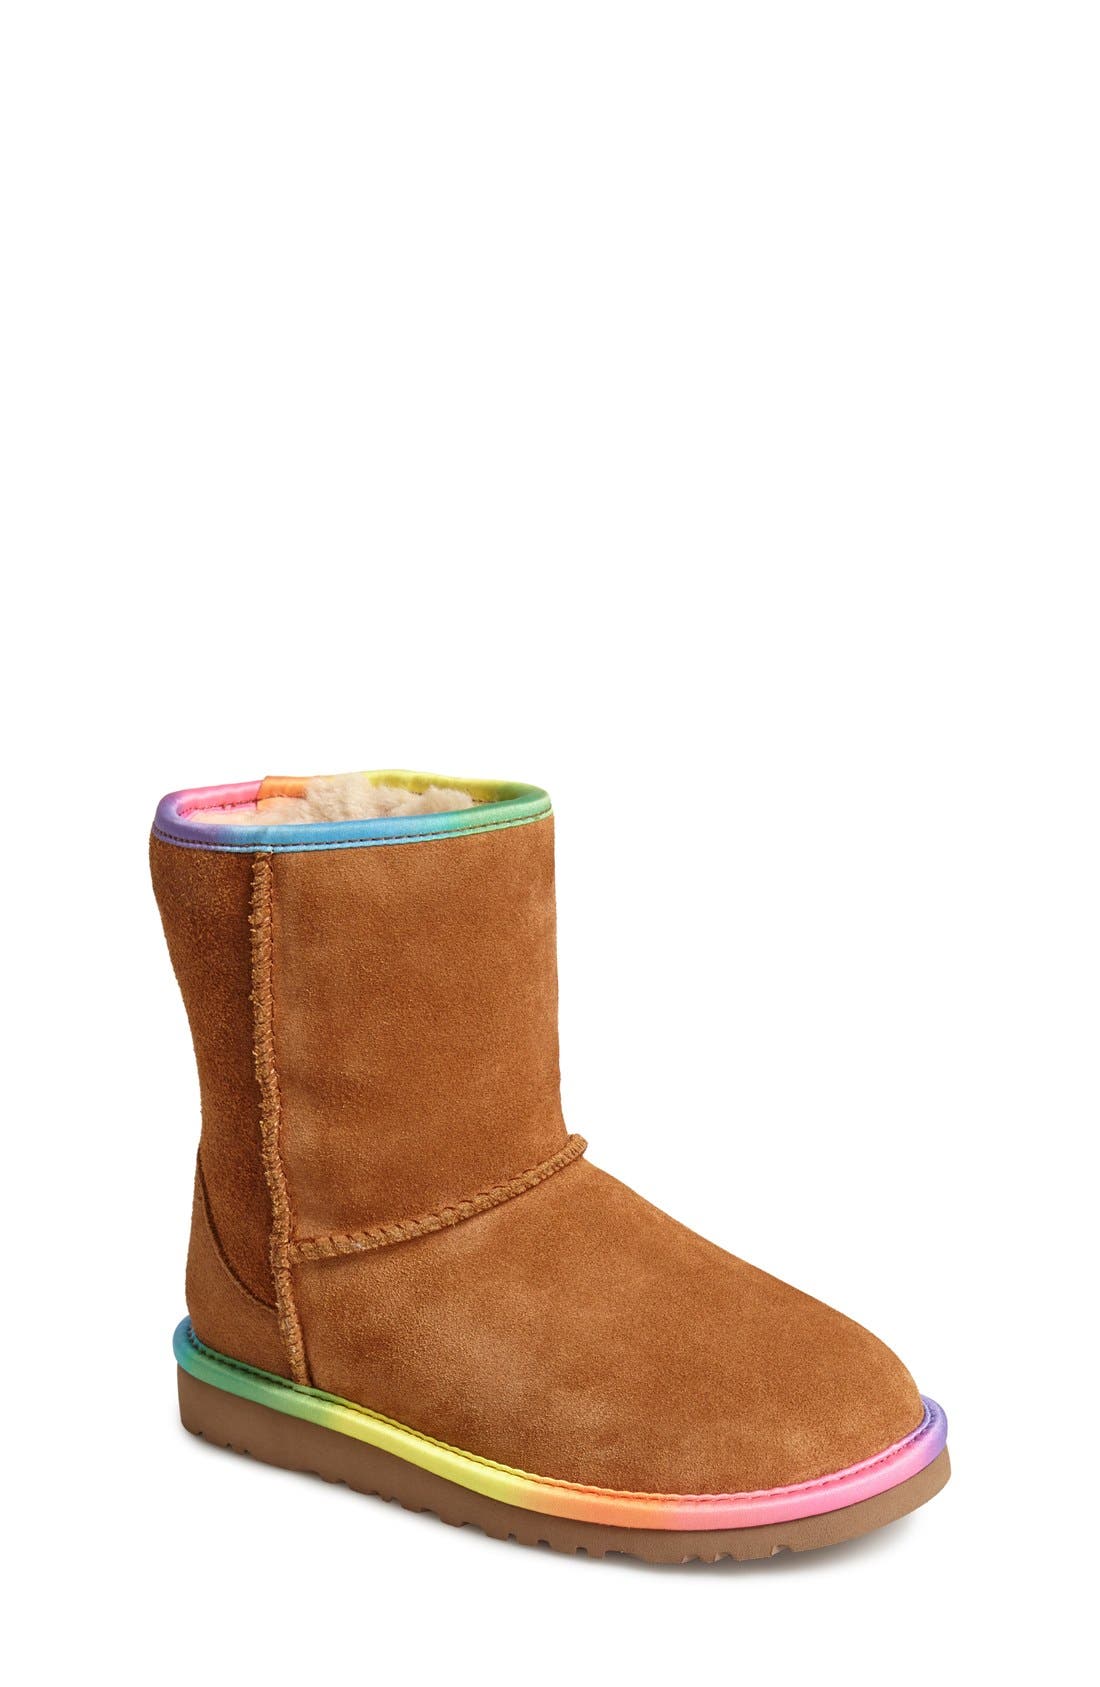 colorful uggs